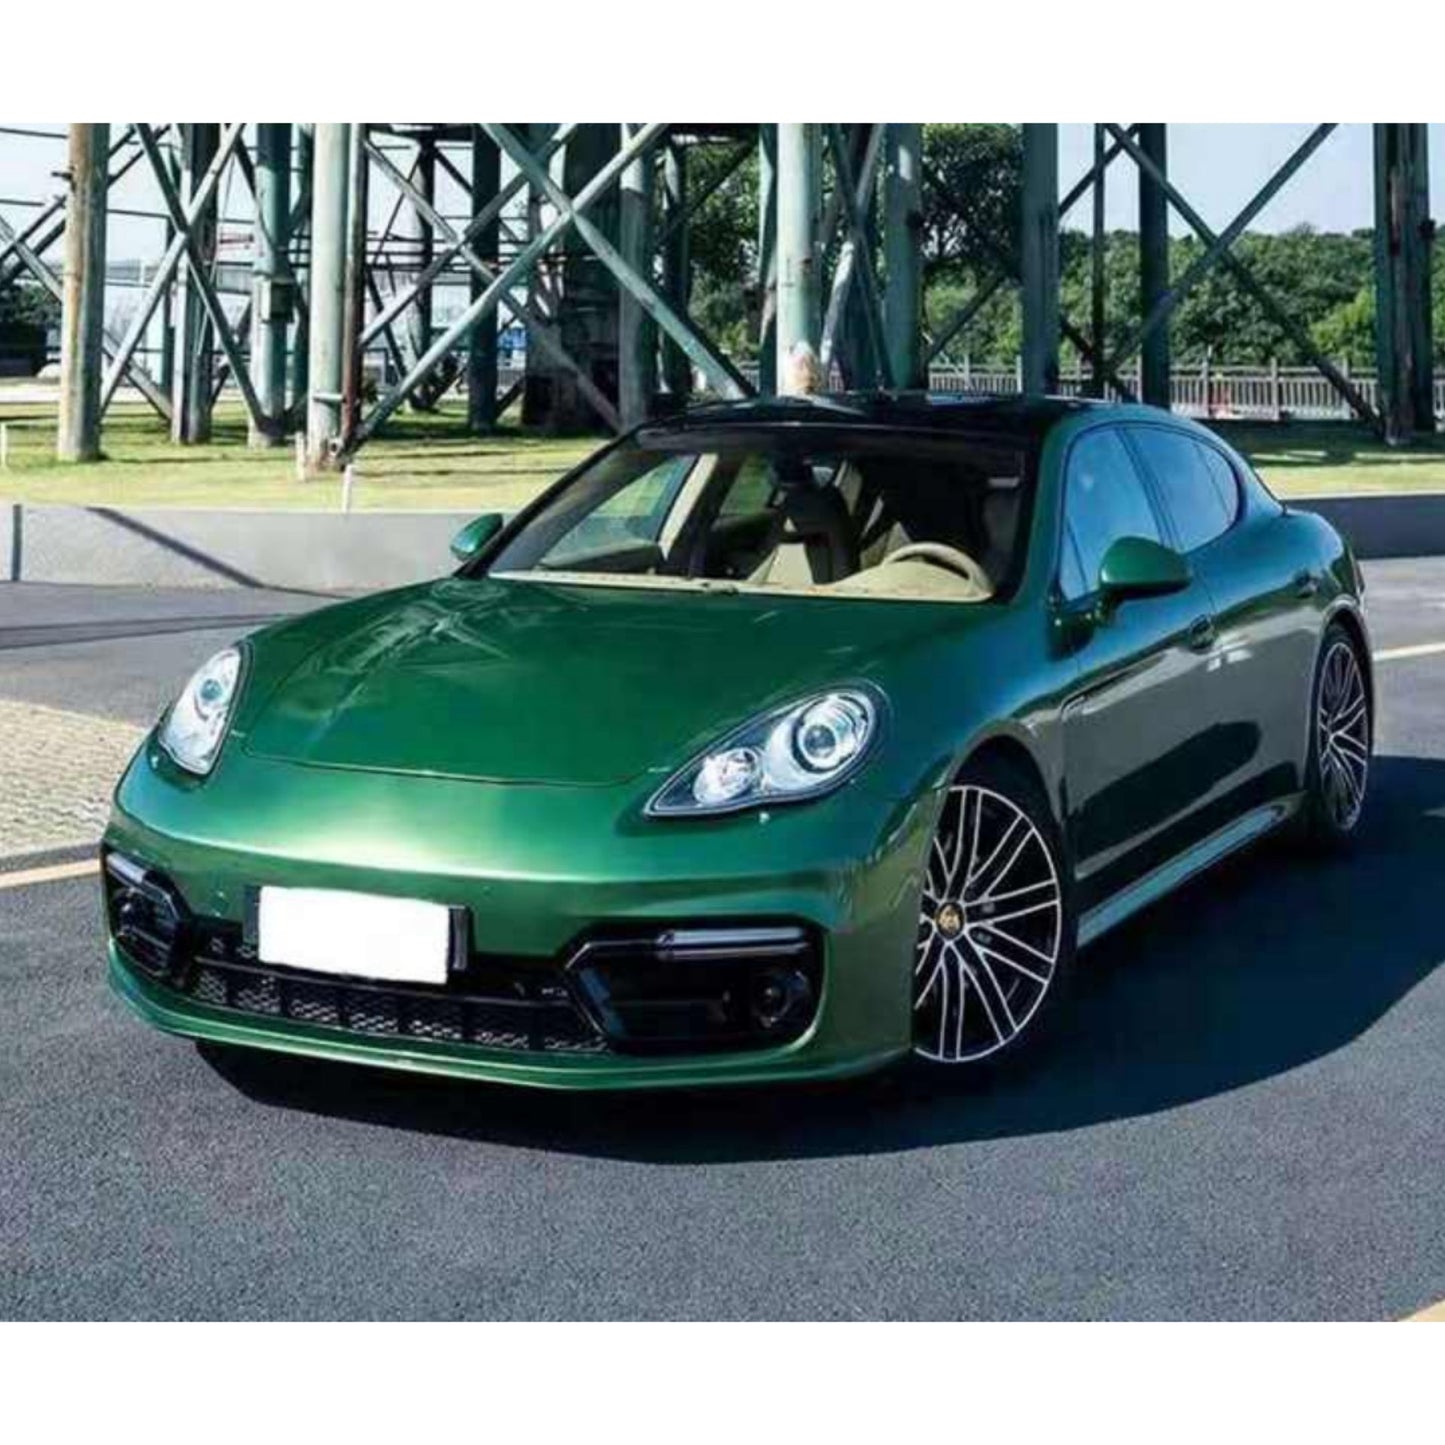 Body Kit For 2010-2016 Porsche Panamera 970 970.1 970.2 Upgrade Panamera 971 GTS Style Front Bumper Car bumpers